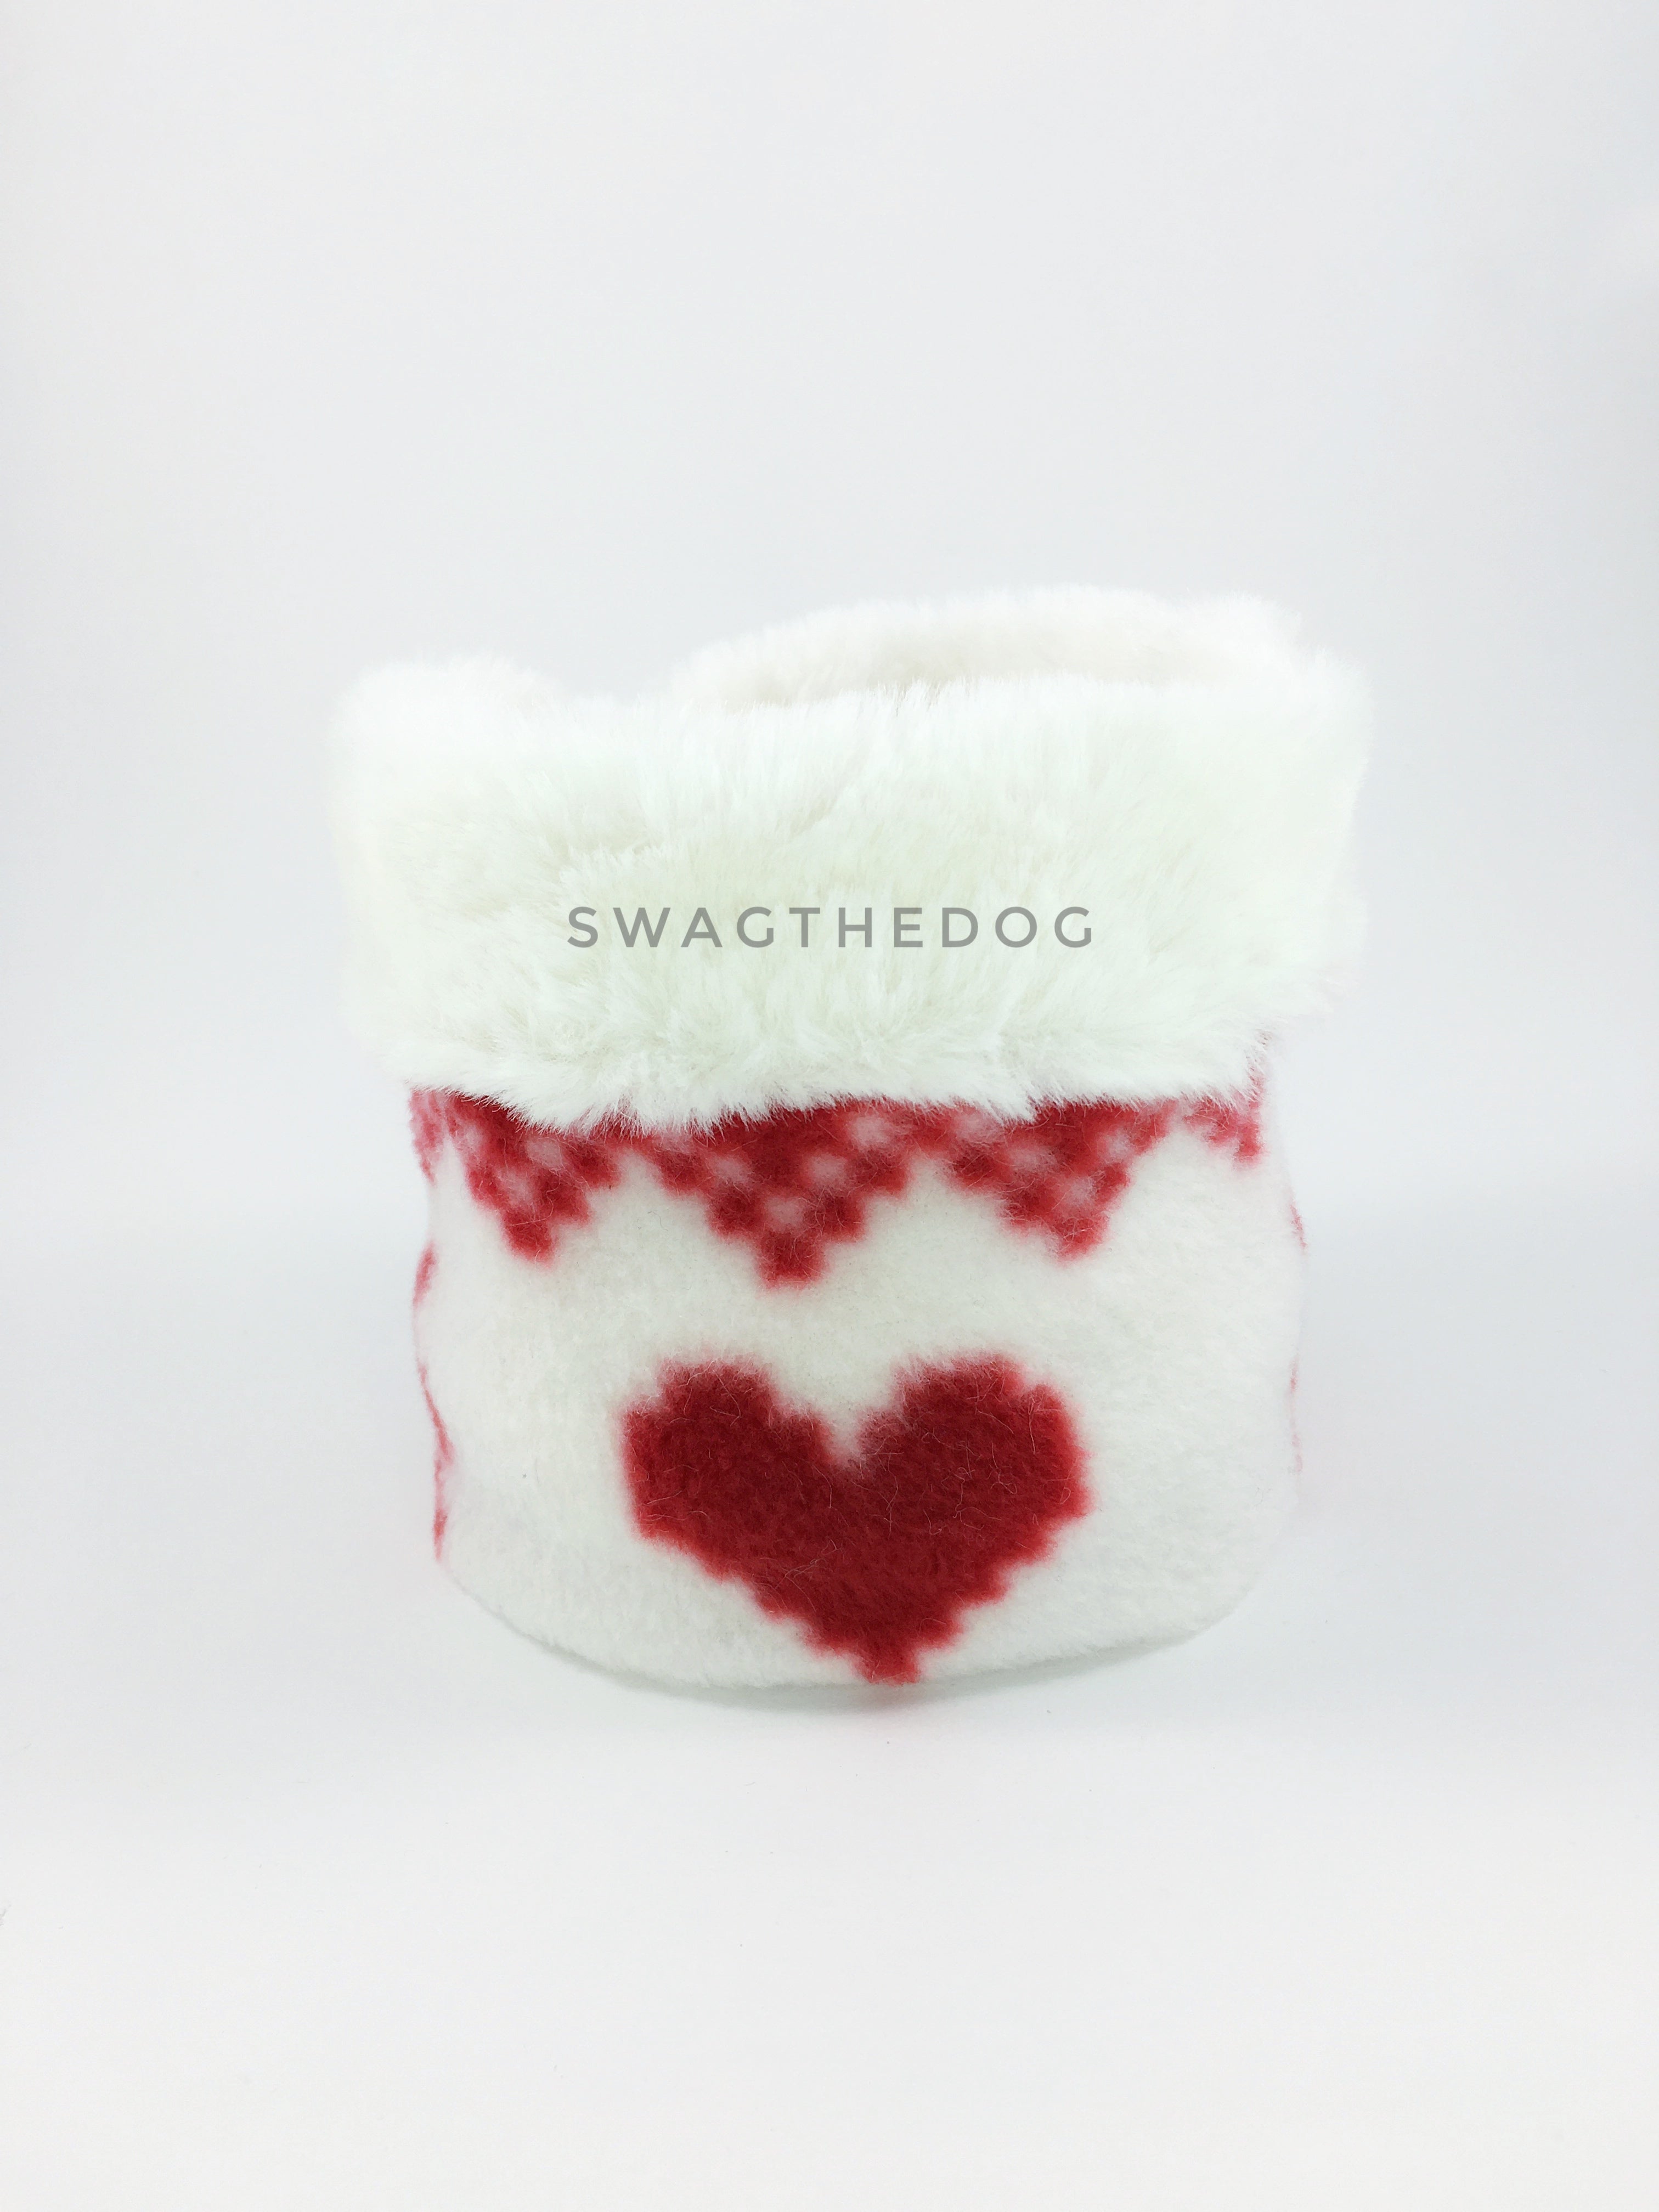 Full of Heart Swagsnood - Product Front View. Cream faux fur rolled up 1/3 of the snood and 2/3 with full of heart print fleece